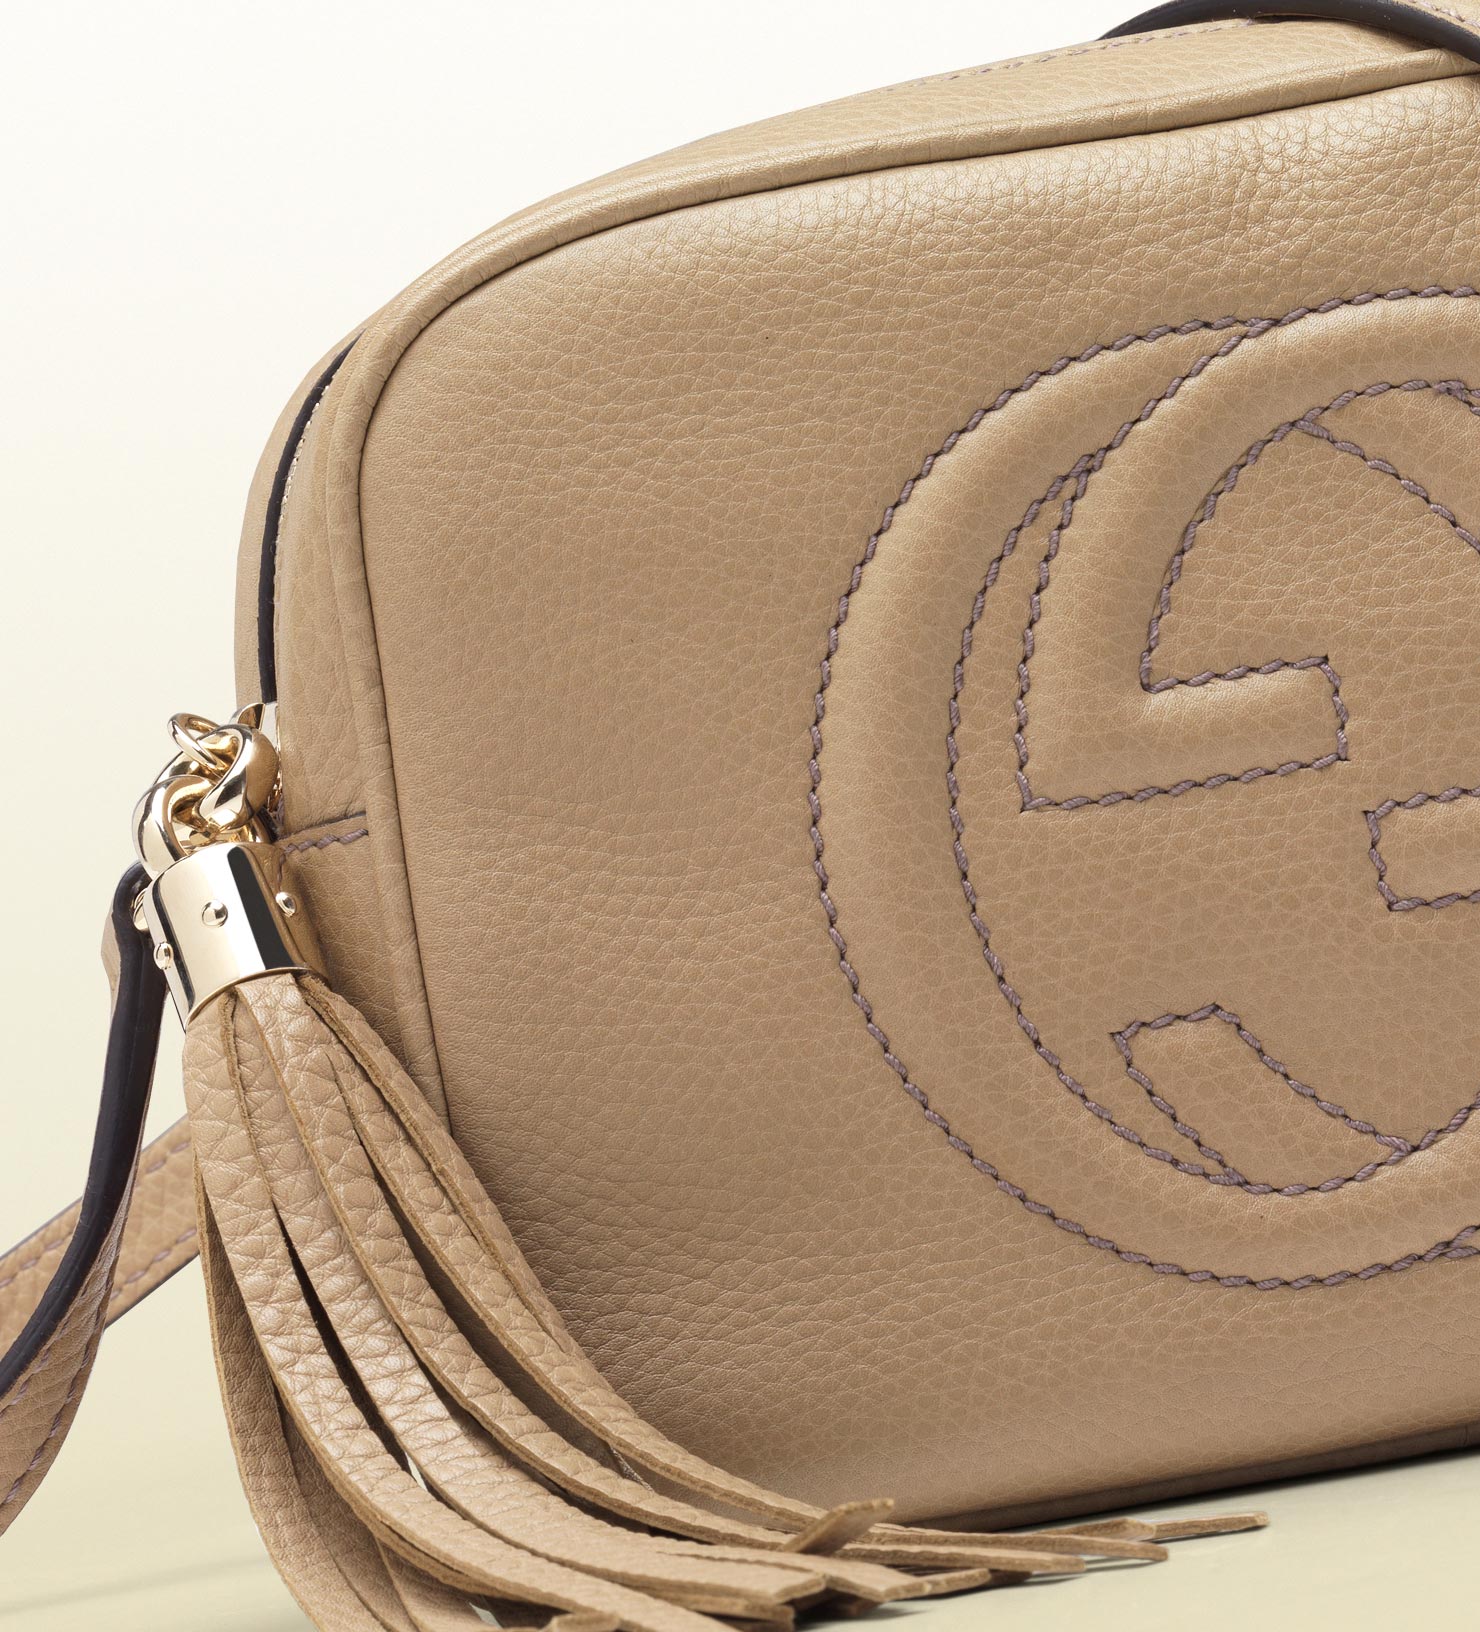 Gucci Soho Cream Leather Disco Bag in Natural - Lyst